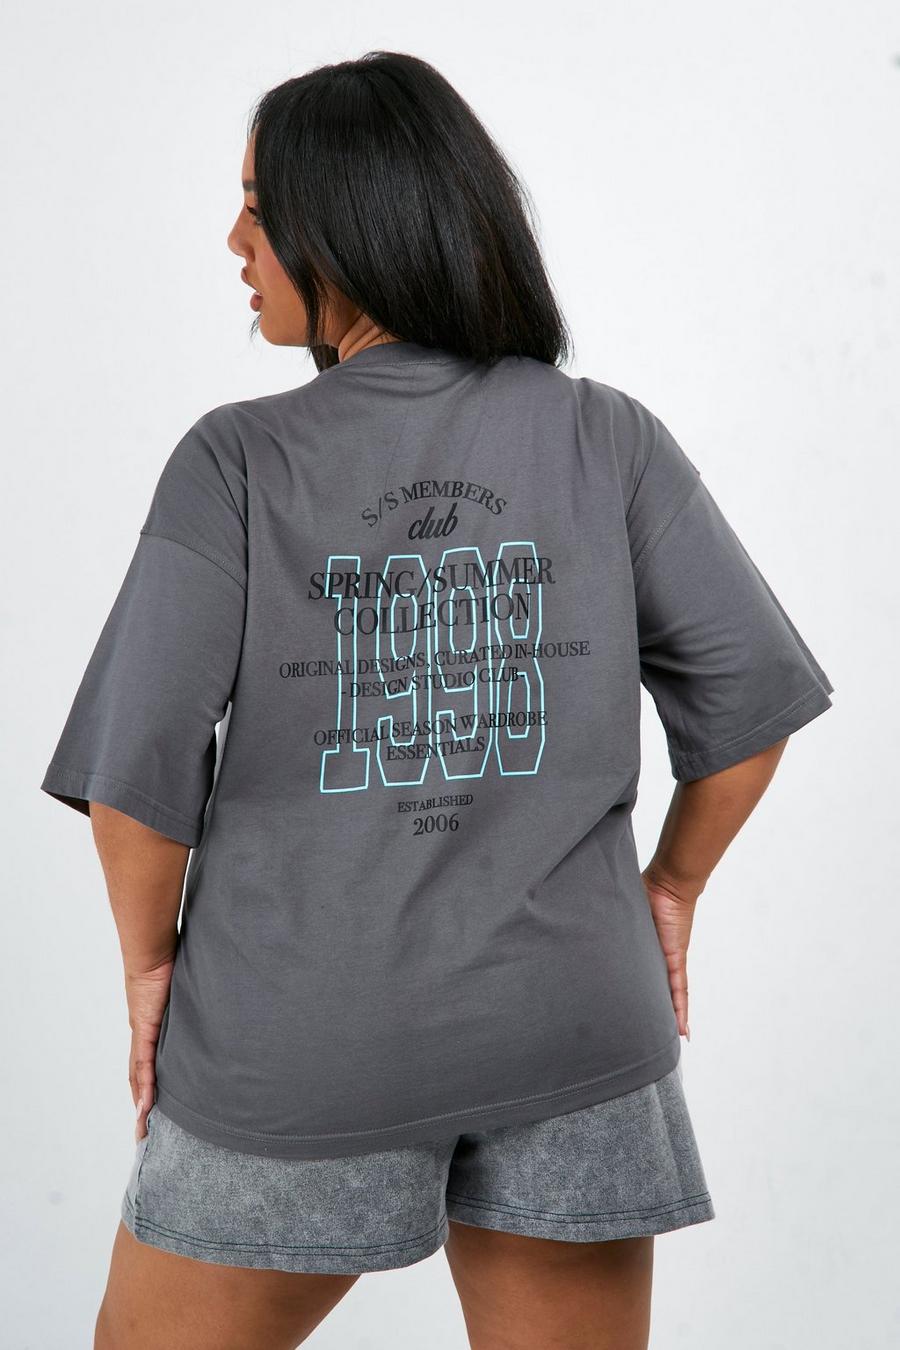 T-shirt Plus Size oversize dei Members Club, Charcoal image number 1